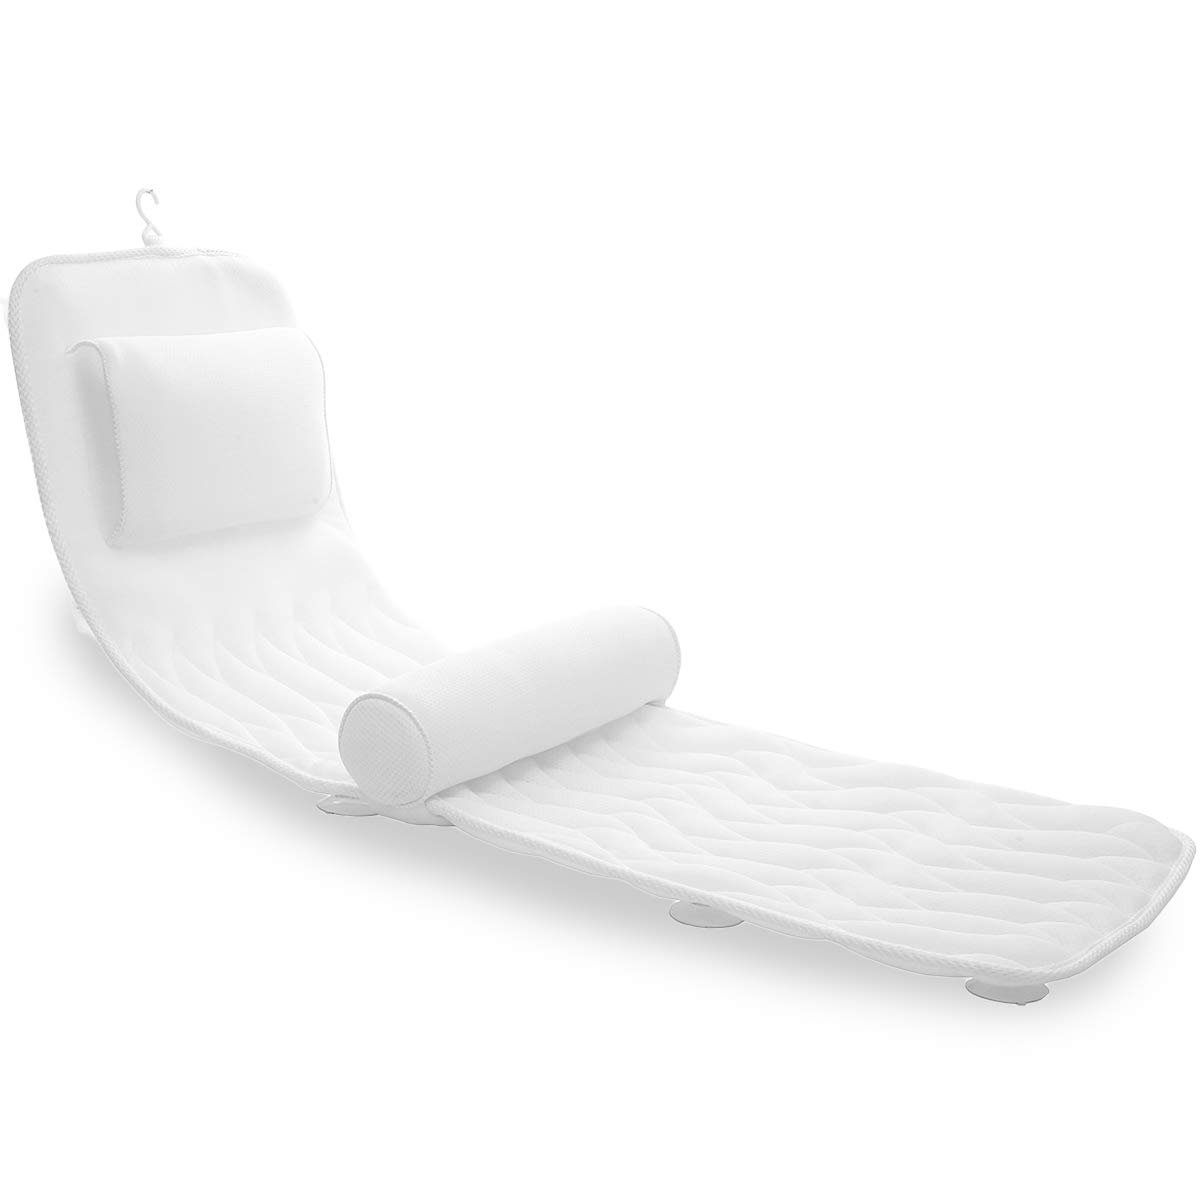 Full Body Bath Pillow with Lumbar Support